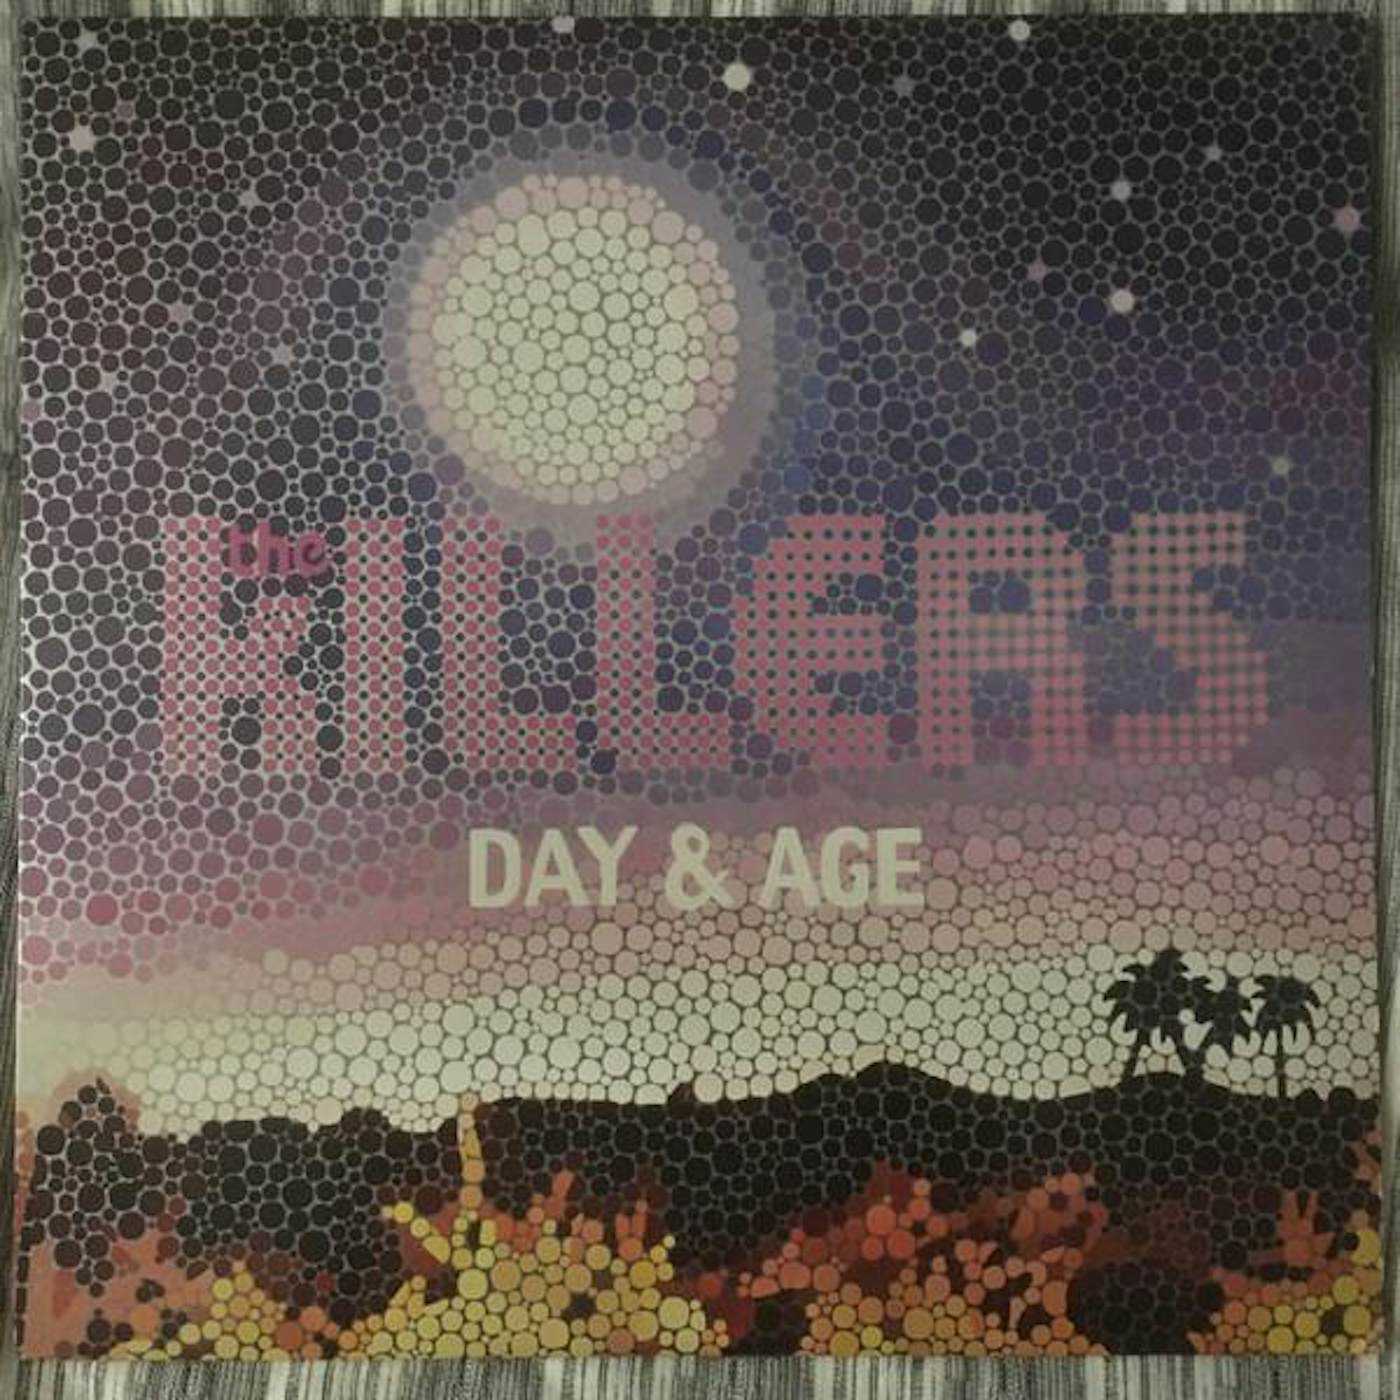 The Killers DAY & AGE (LP) Vinyl Record